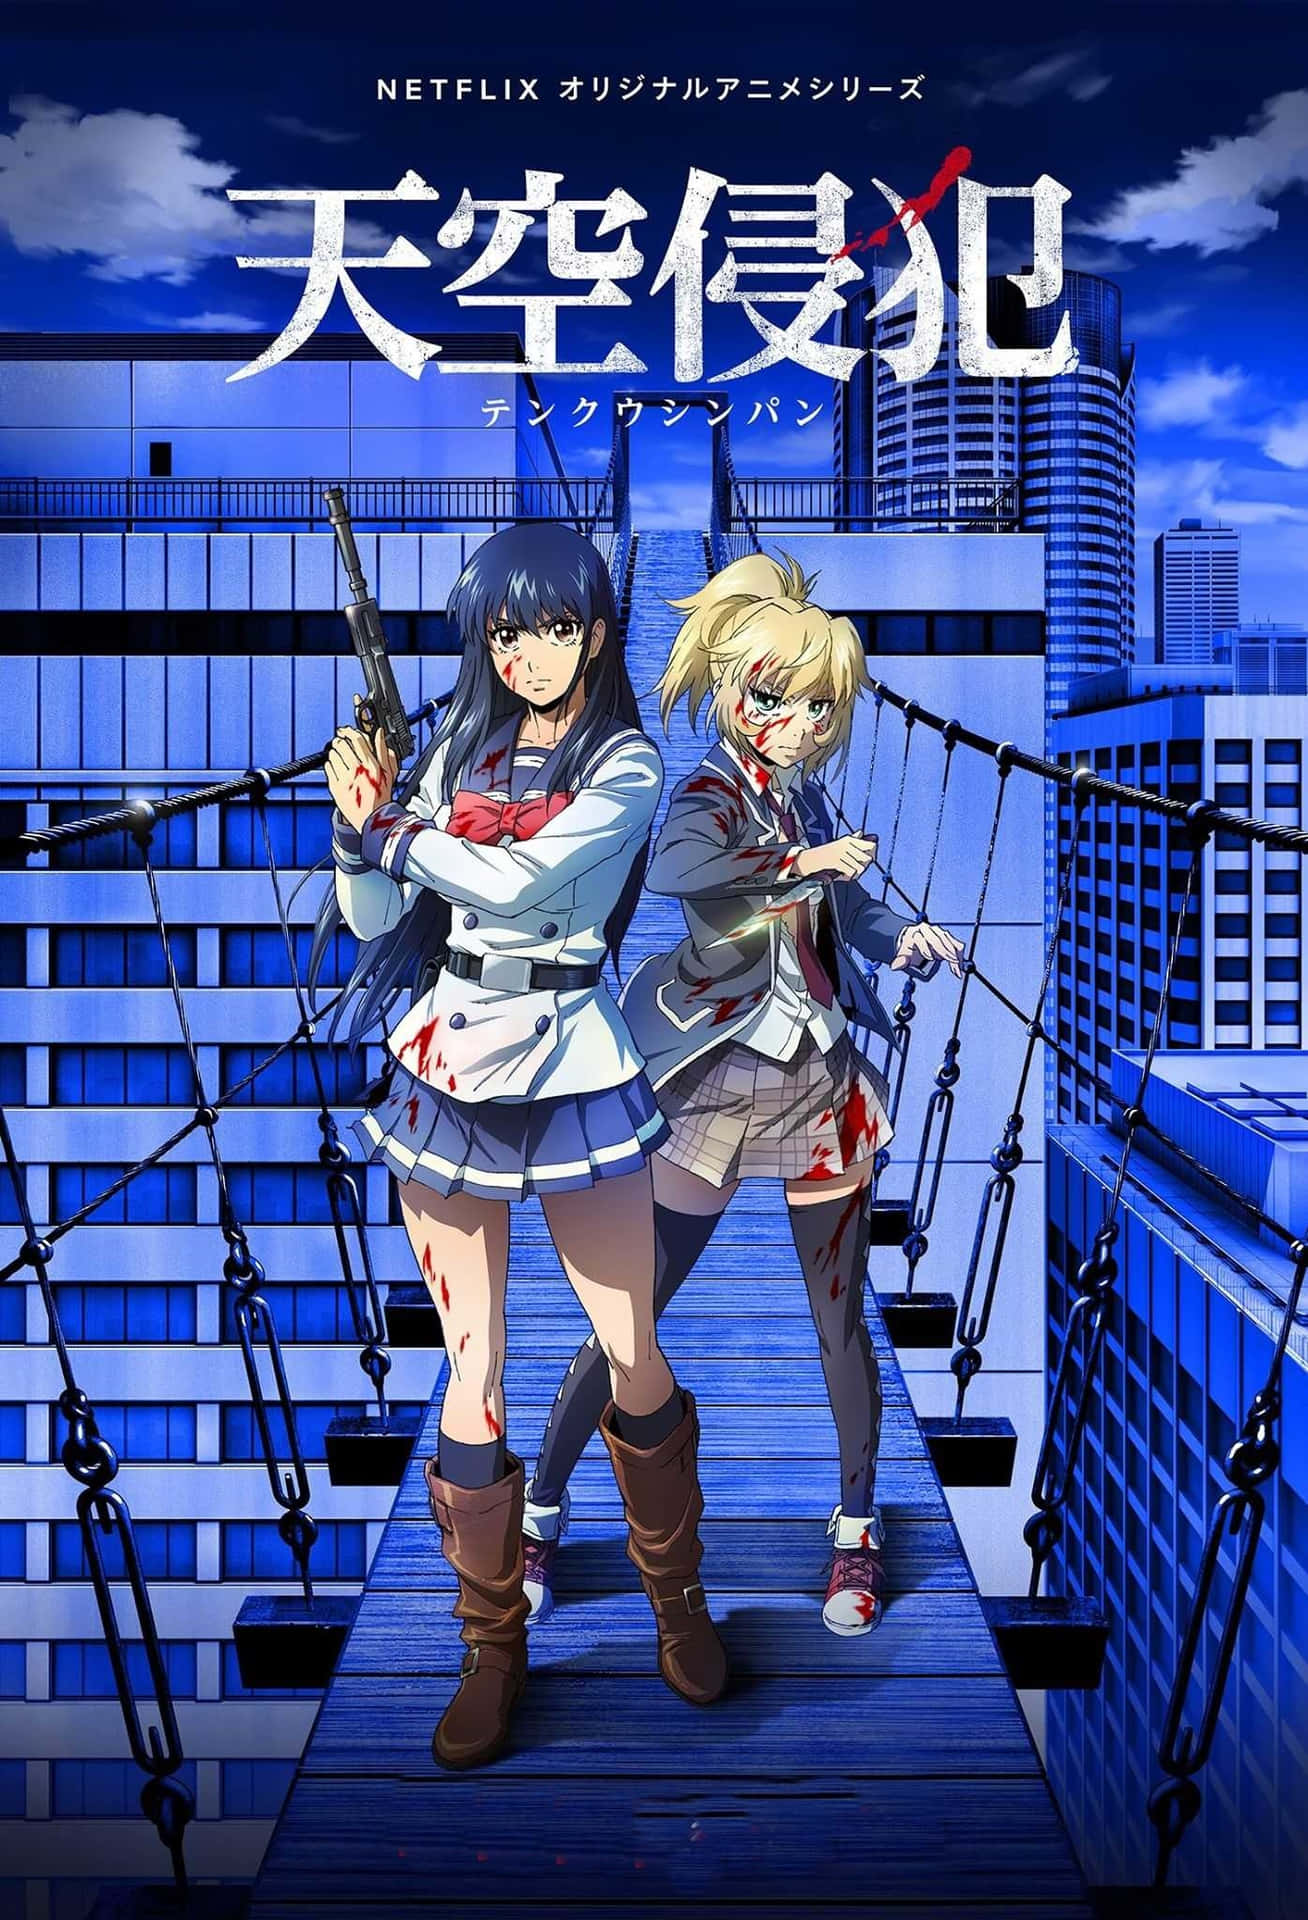 A Poster For A Anime Series With Two Girls On A Bridge